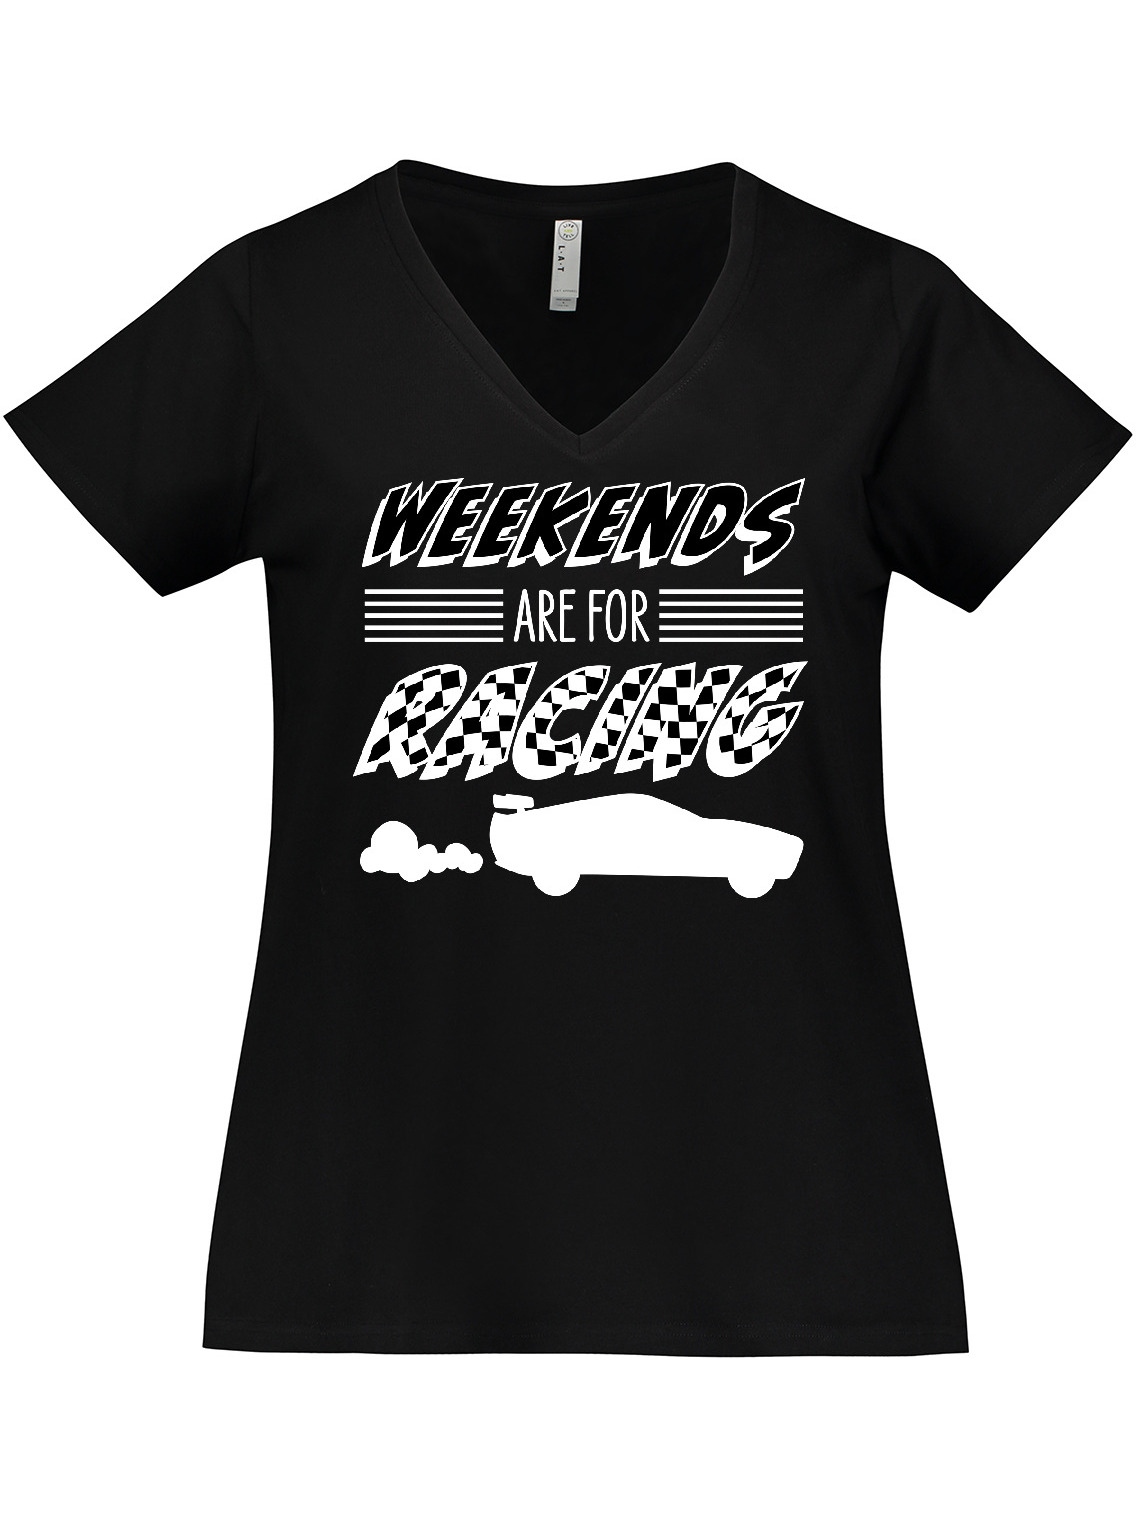 Inktastic Weekends are for Racing Race Car Silhouette and Racing Flag Women's Plus Size V-Neck T-Shirt - image 1 of 4